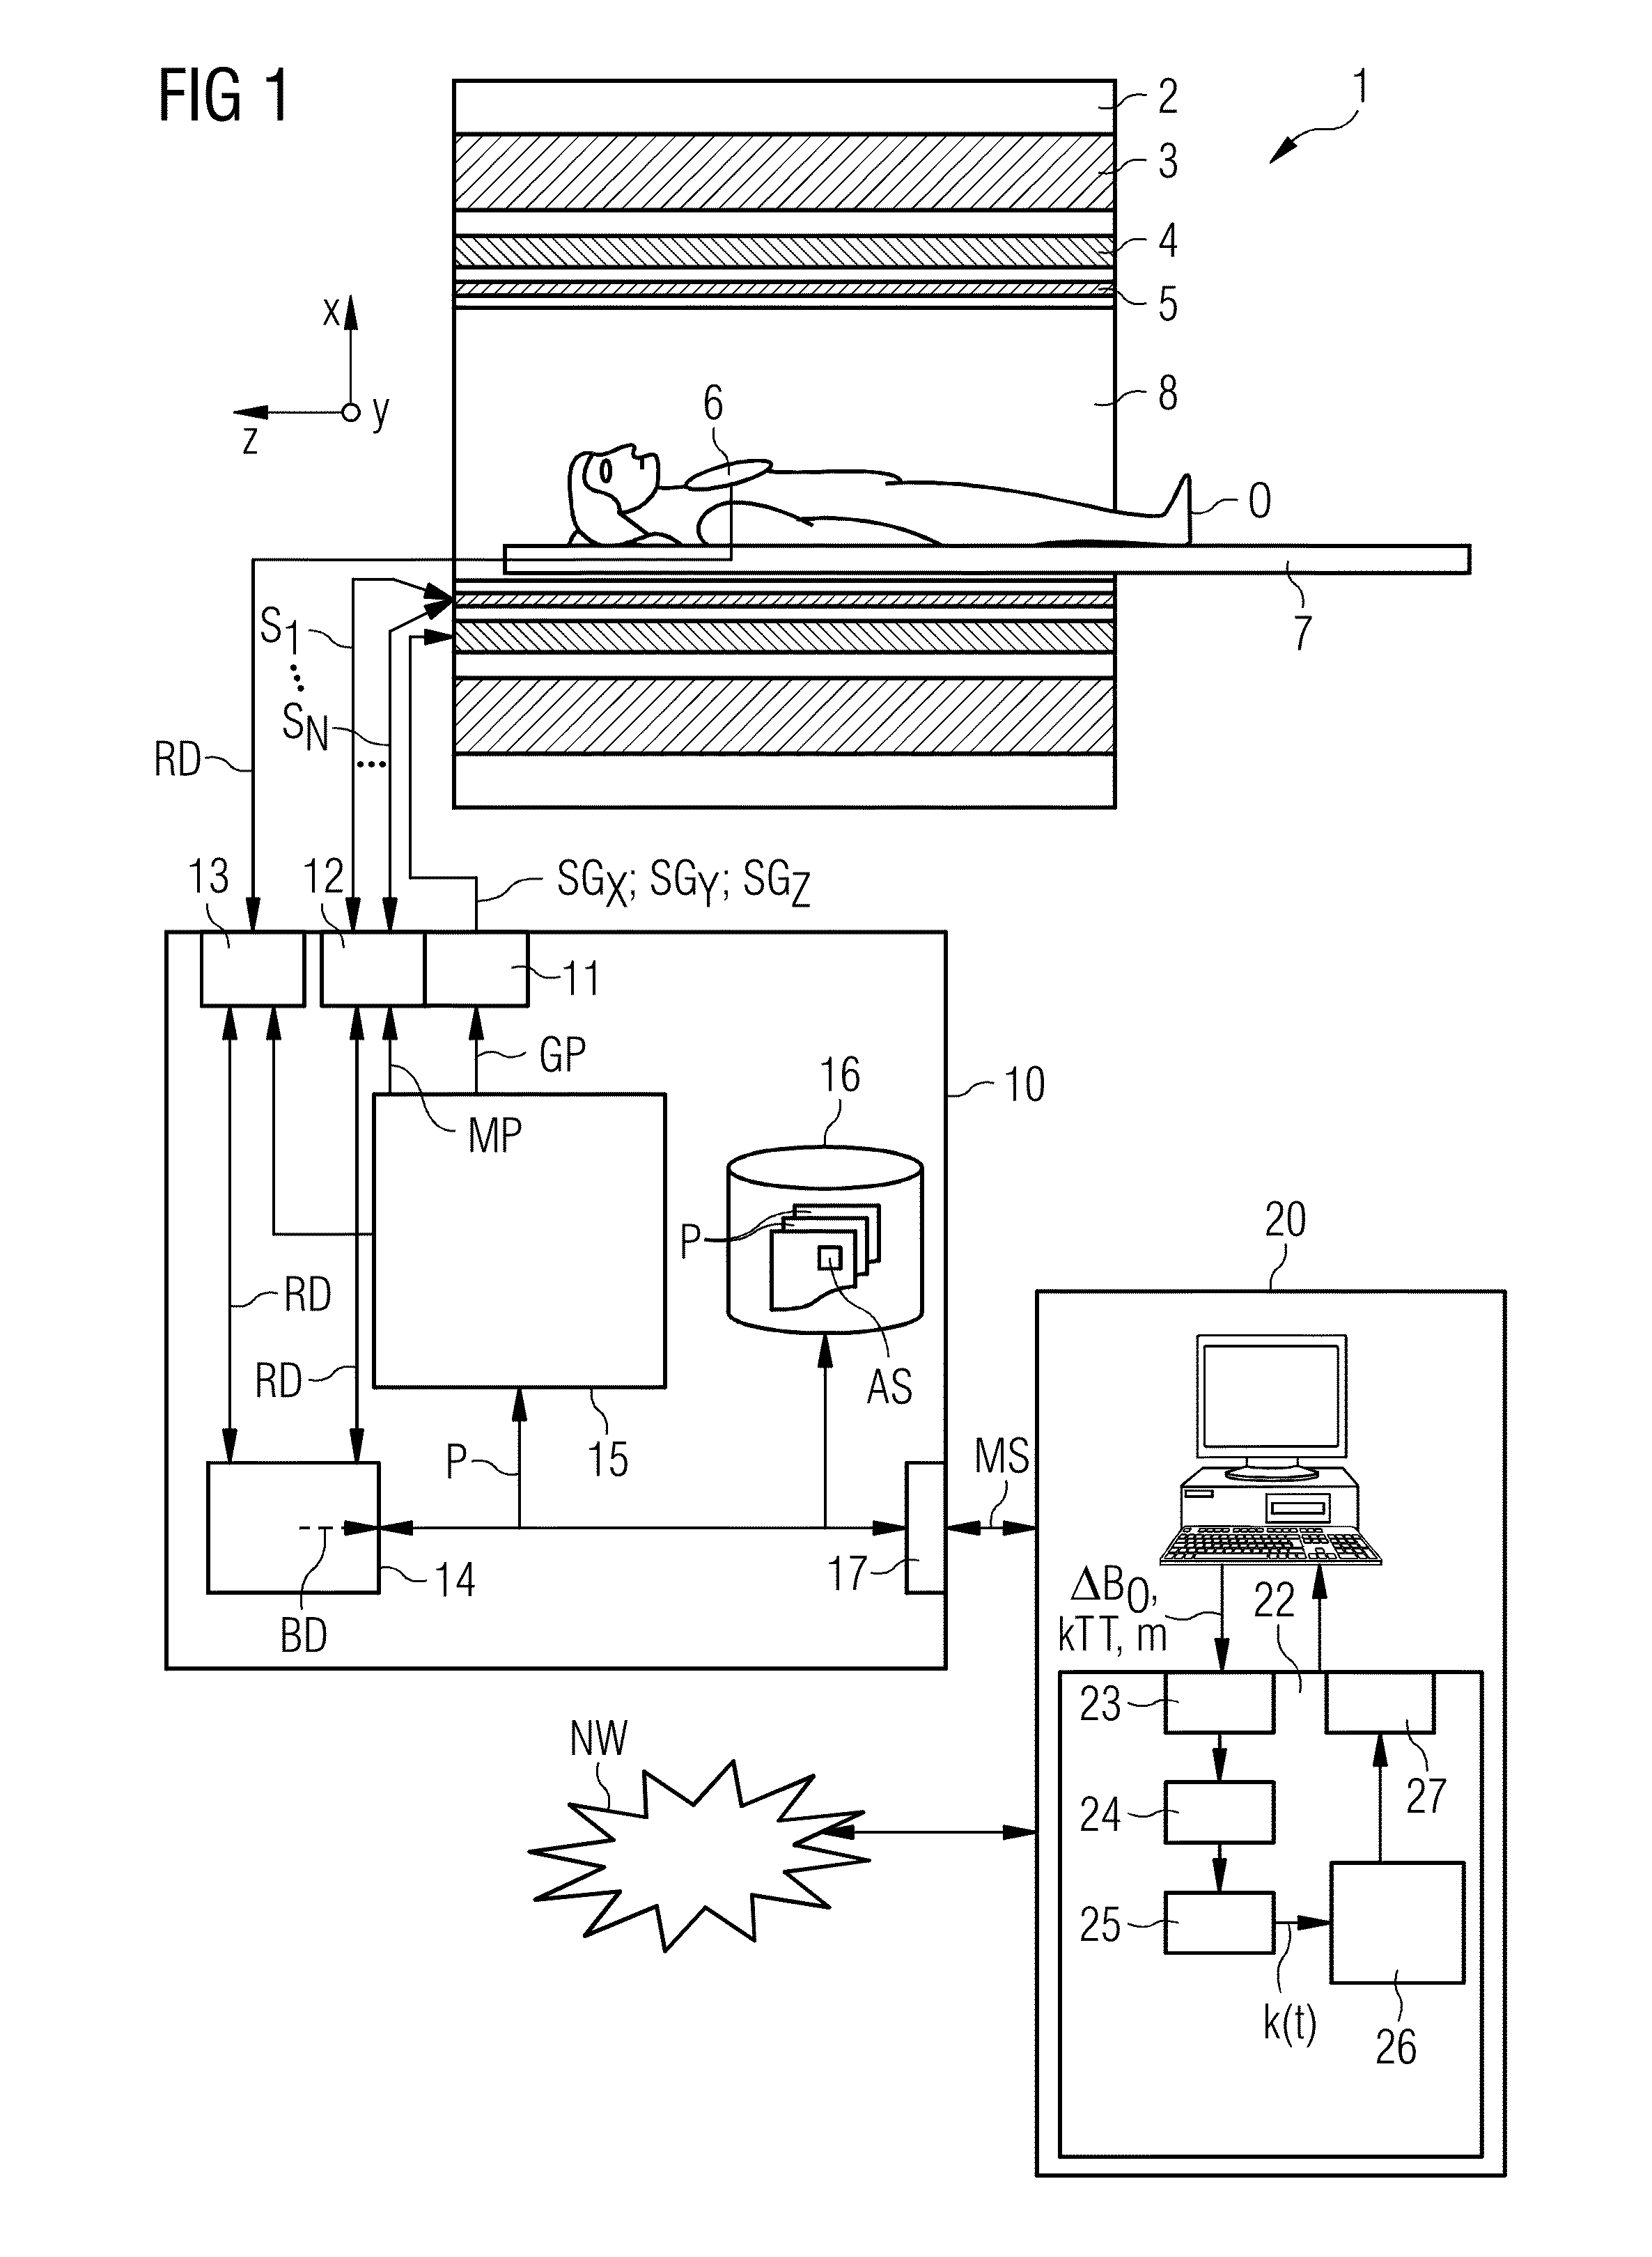 Determination of a Magnetic Resonance System Activation Sequence